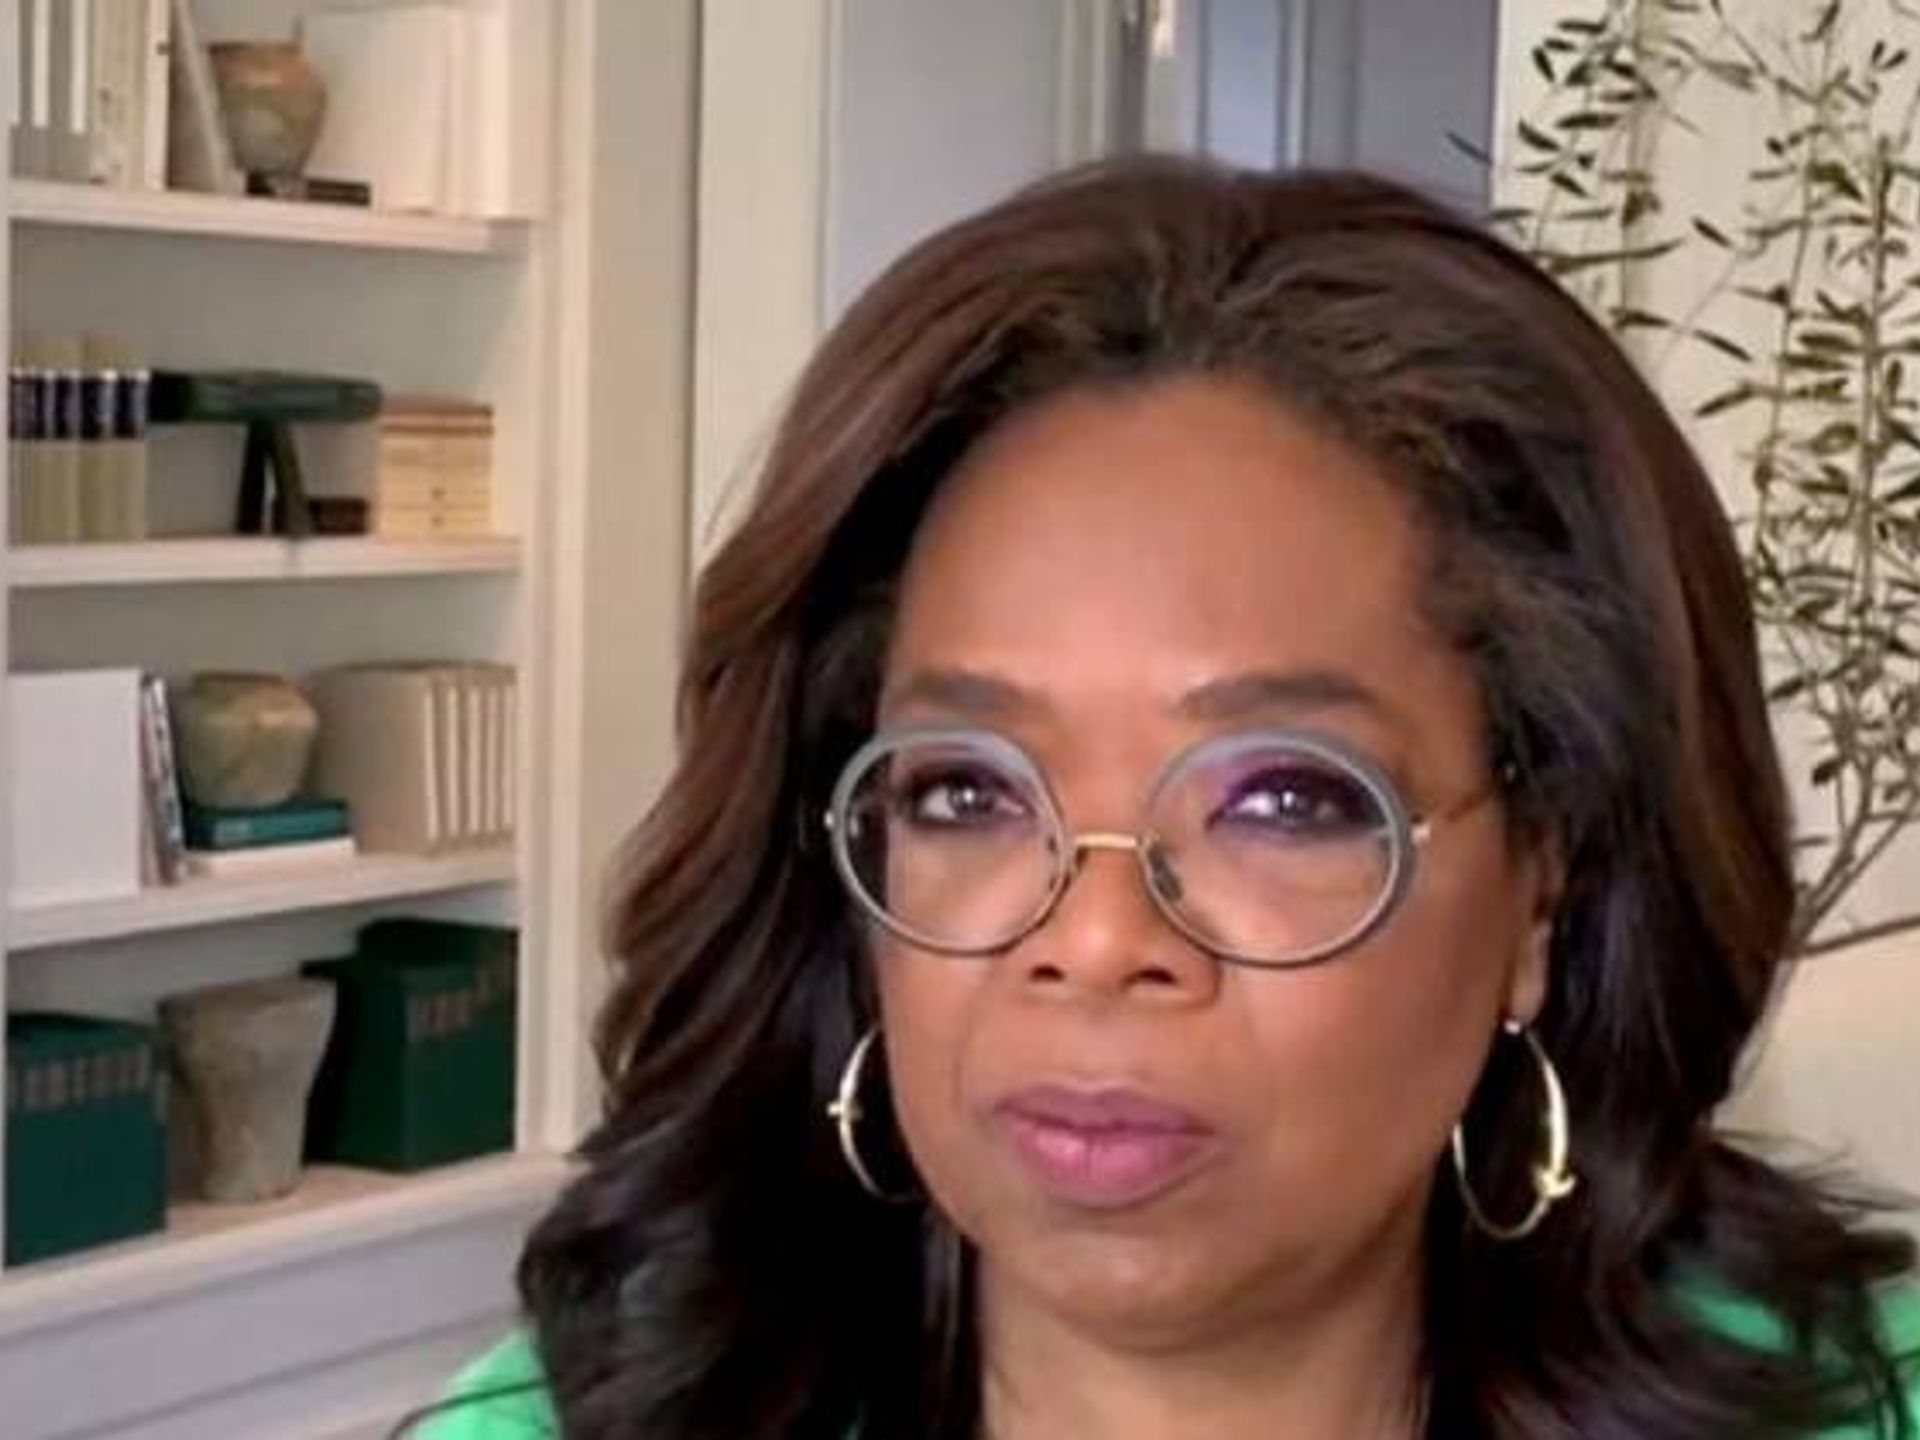 Oprah defends Ozempic use in new documentary after 40lbs weight loss